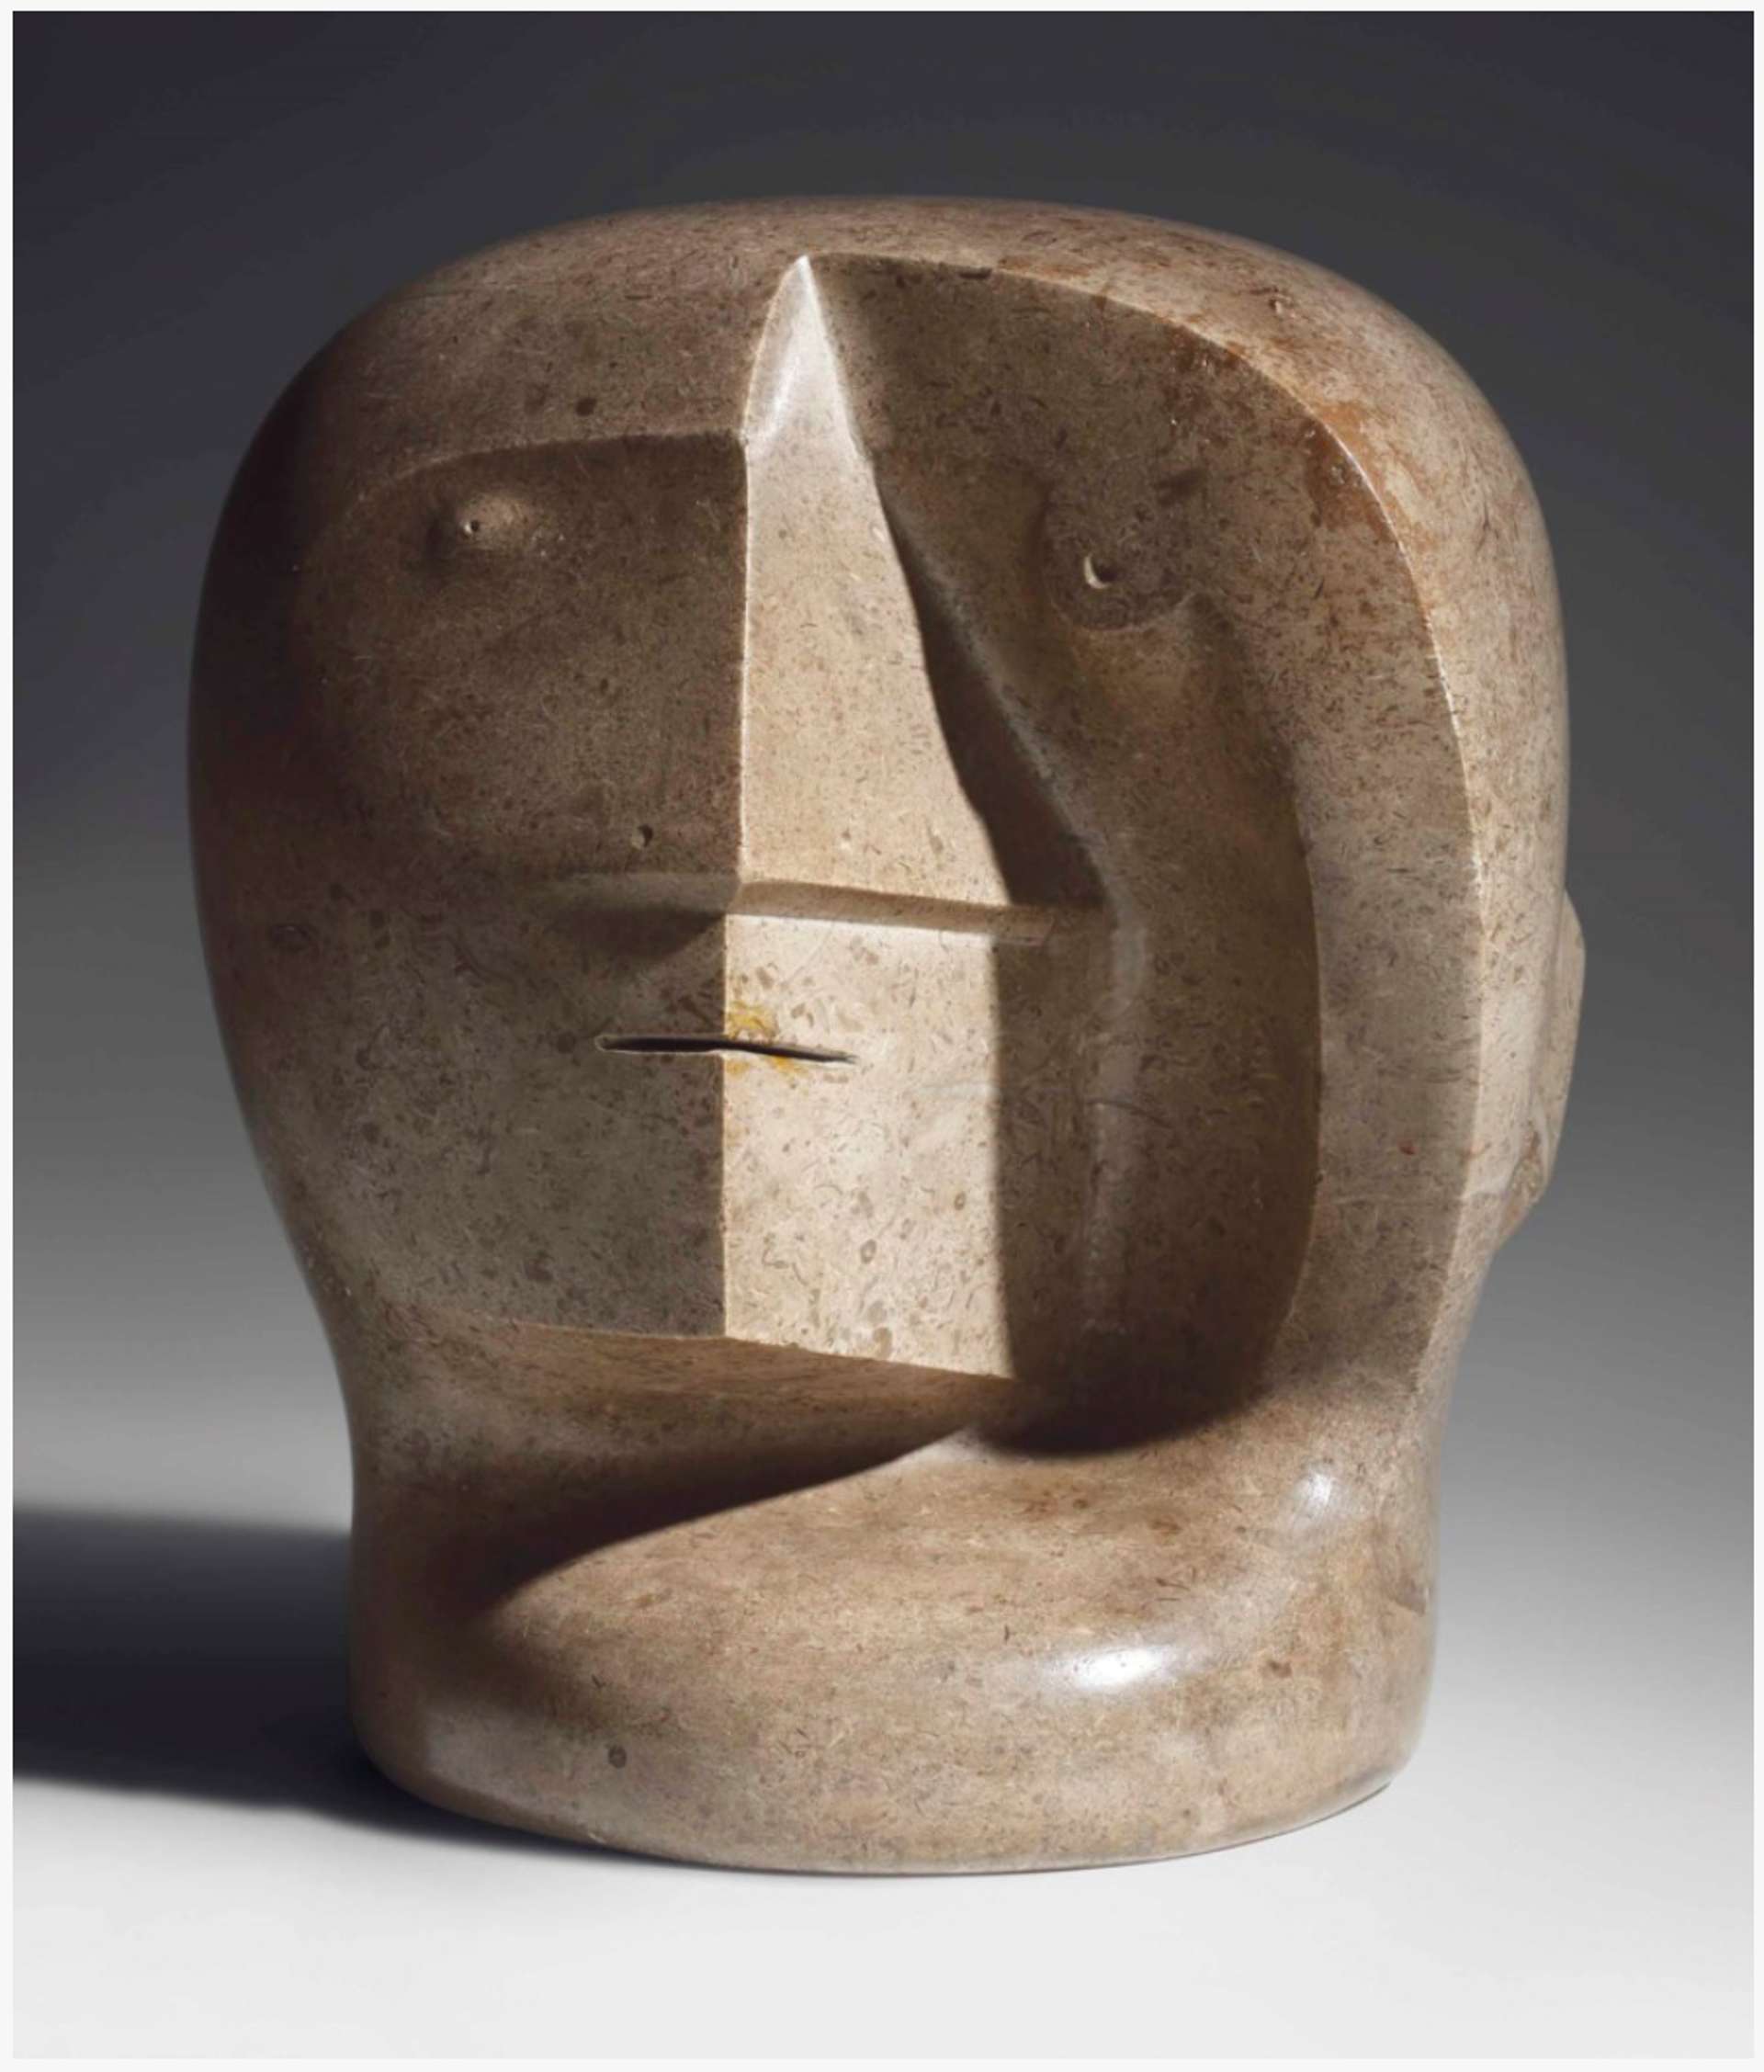 An early sculpture by Henry Moore featuring a jagged and unsymmetrical head with distinct Aztec chacmool features. The sculpture rests on a round base.